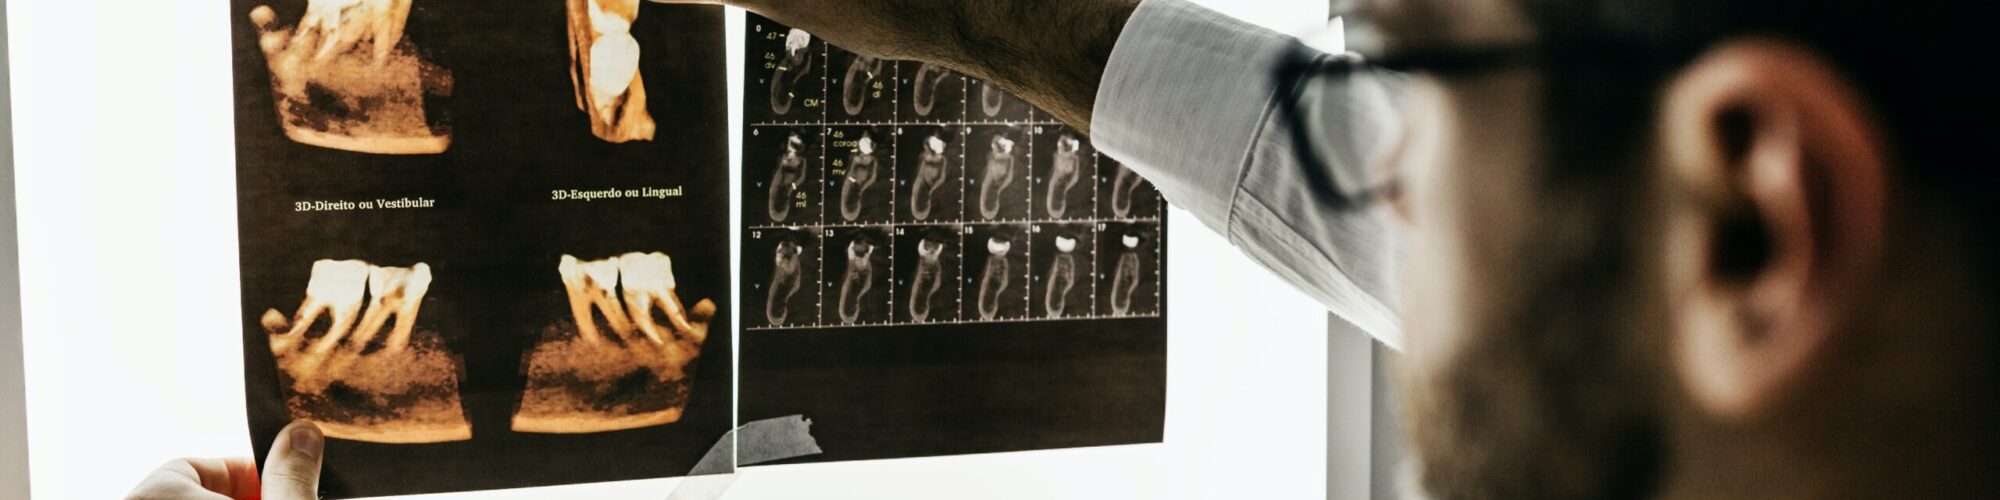 A dental professional examines an oral xray